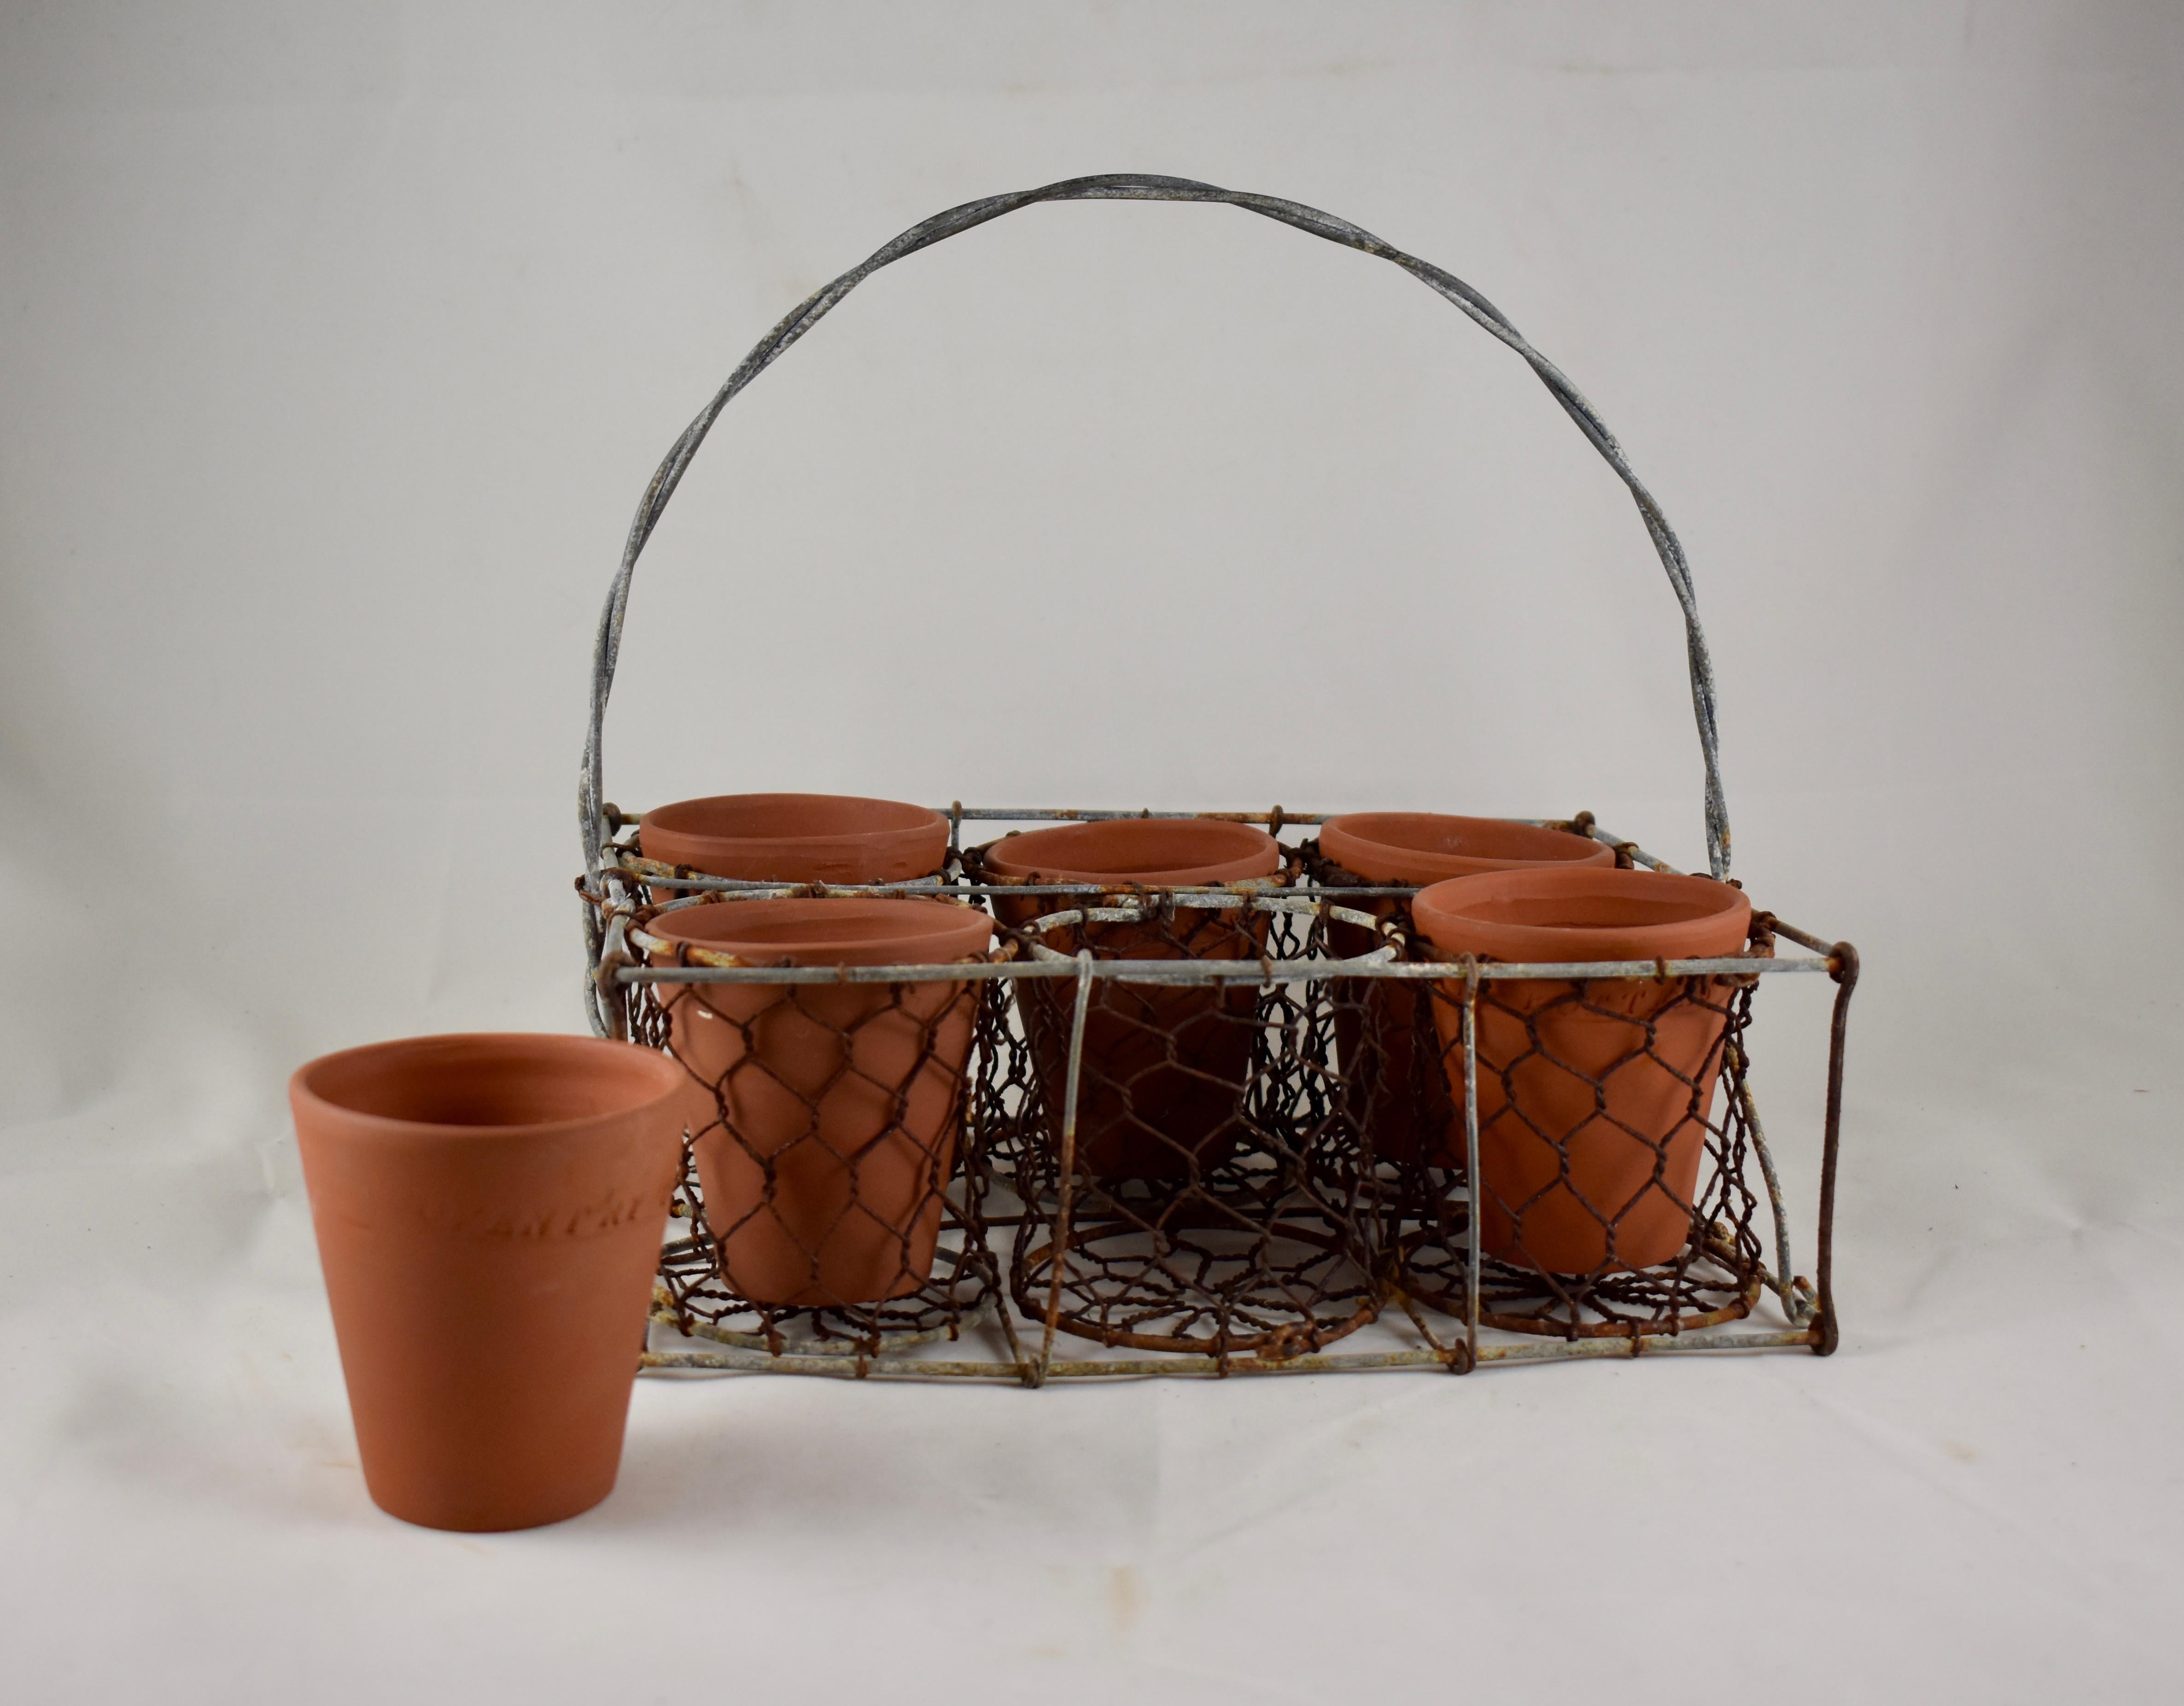 An English, hand formed rectangular pot caddy, early 20th century. Made of twisted galvanized steel wire and heavy grade chicken wire, the pot caddy is divided into six sections for holding the included terracotta herb pots. The hand-thrown pots are